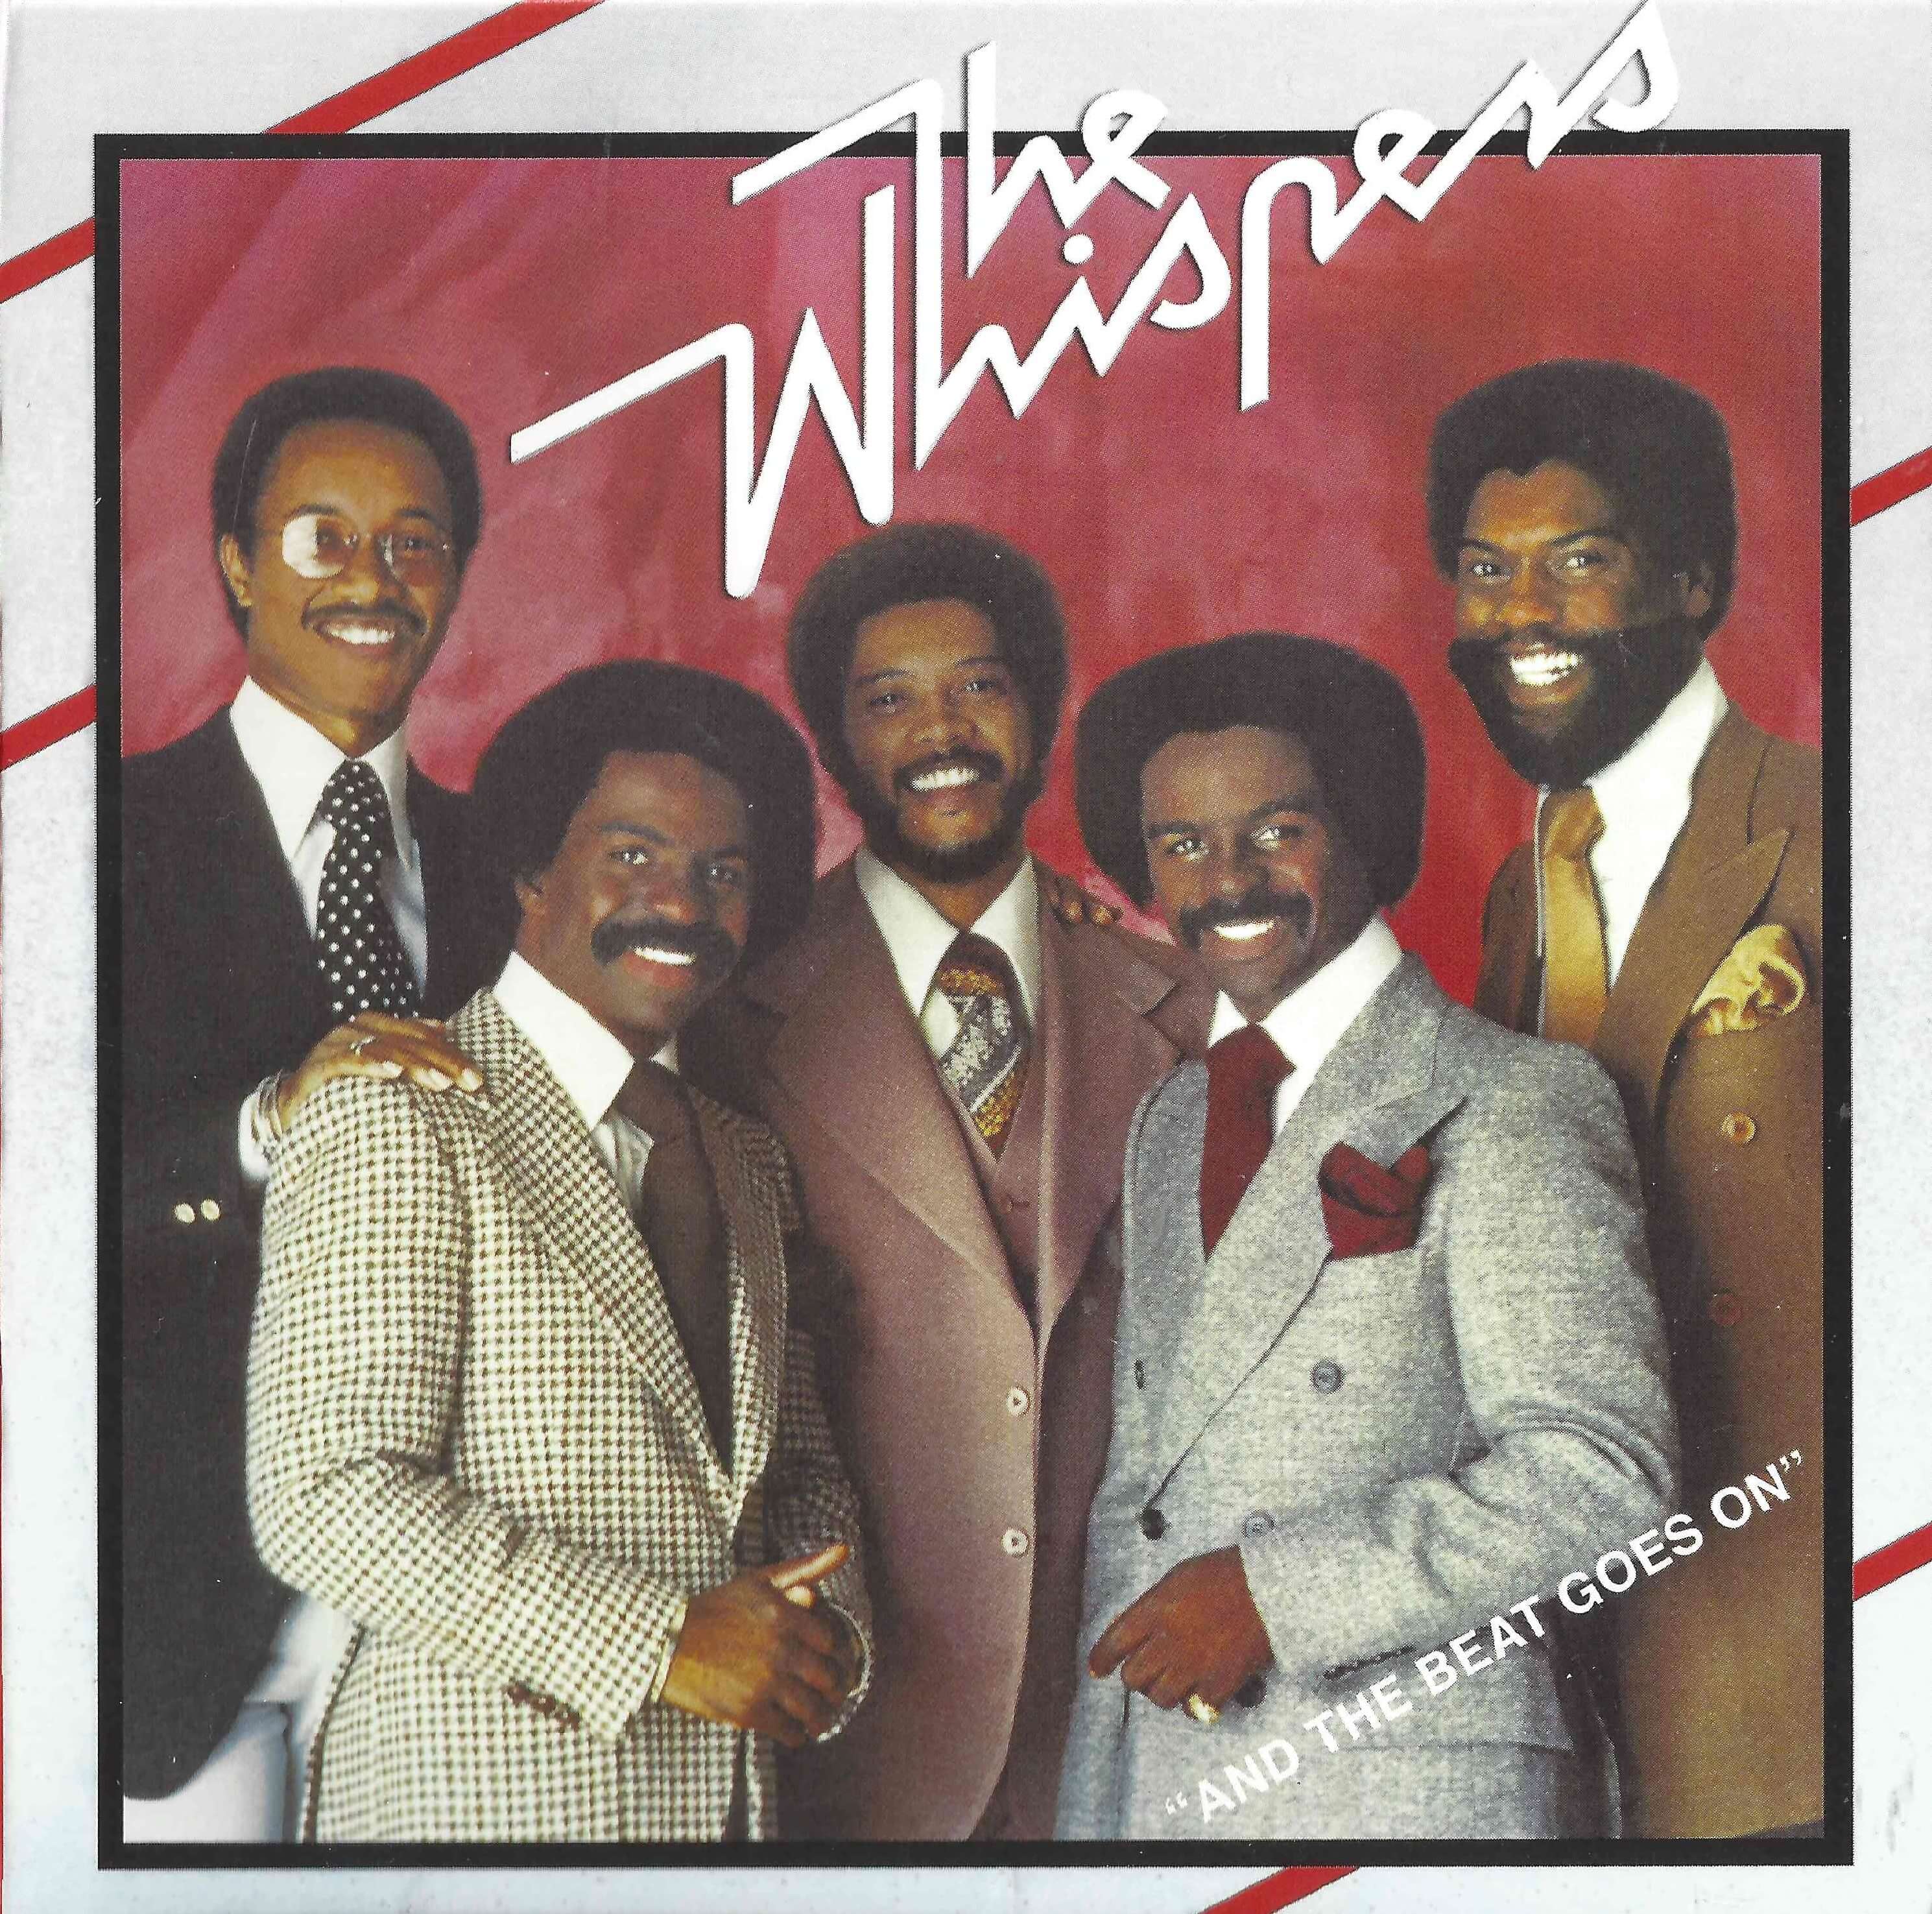 And the beat goes on. Whispered группа. The Whispers - the Whispers (1979). The Whispers - and the Beat goes on. Sylvester диско.